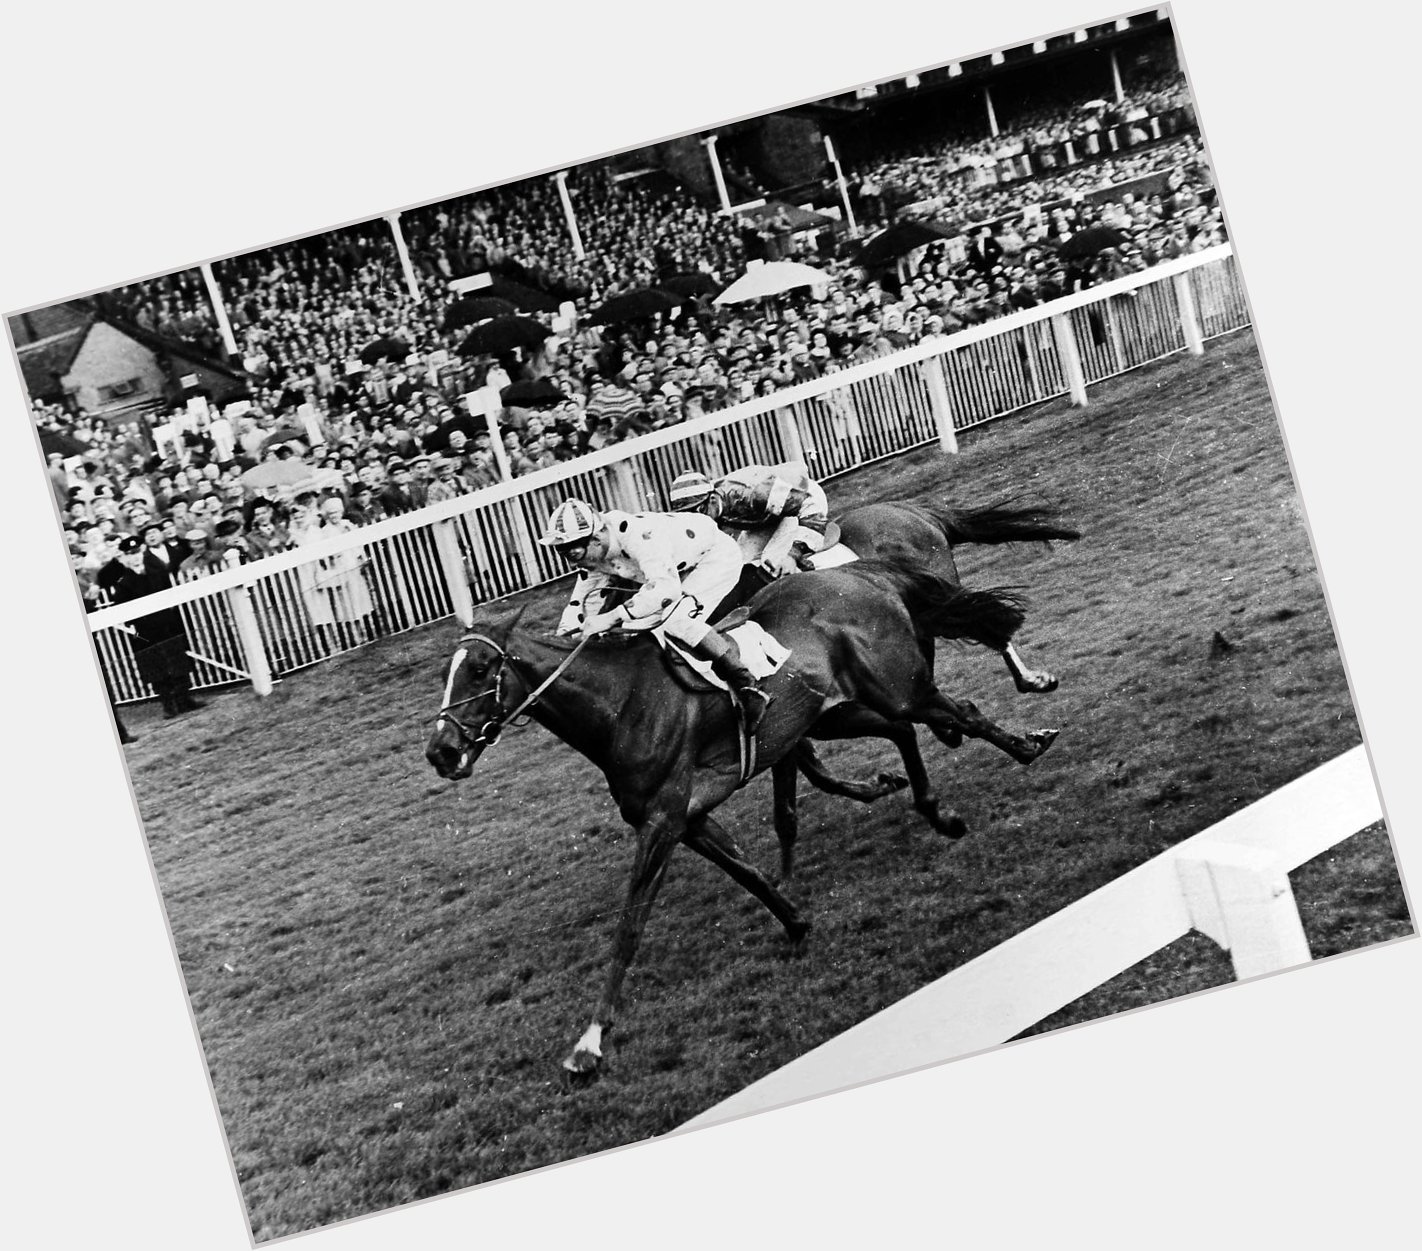 Happy Birthday to Lester Piggott who turned 80 yesterday! Here he is winning in 